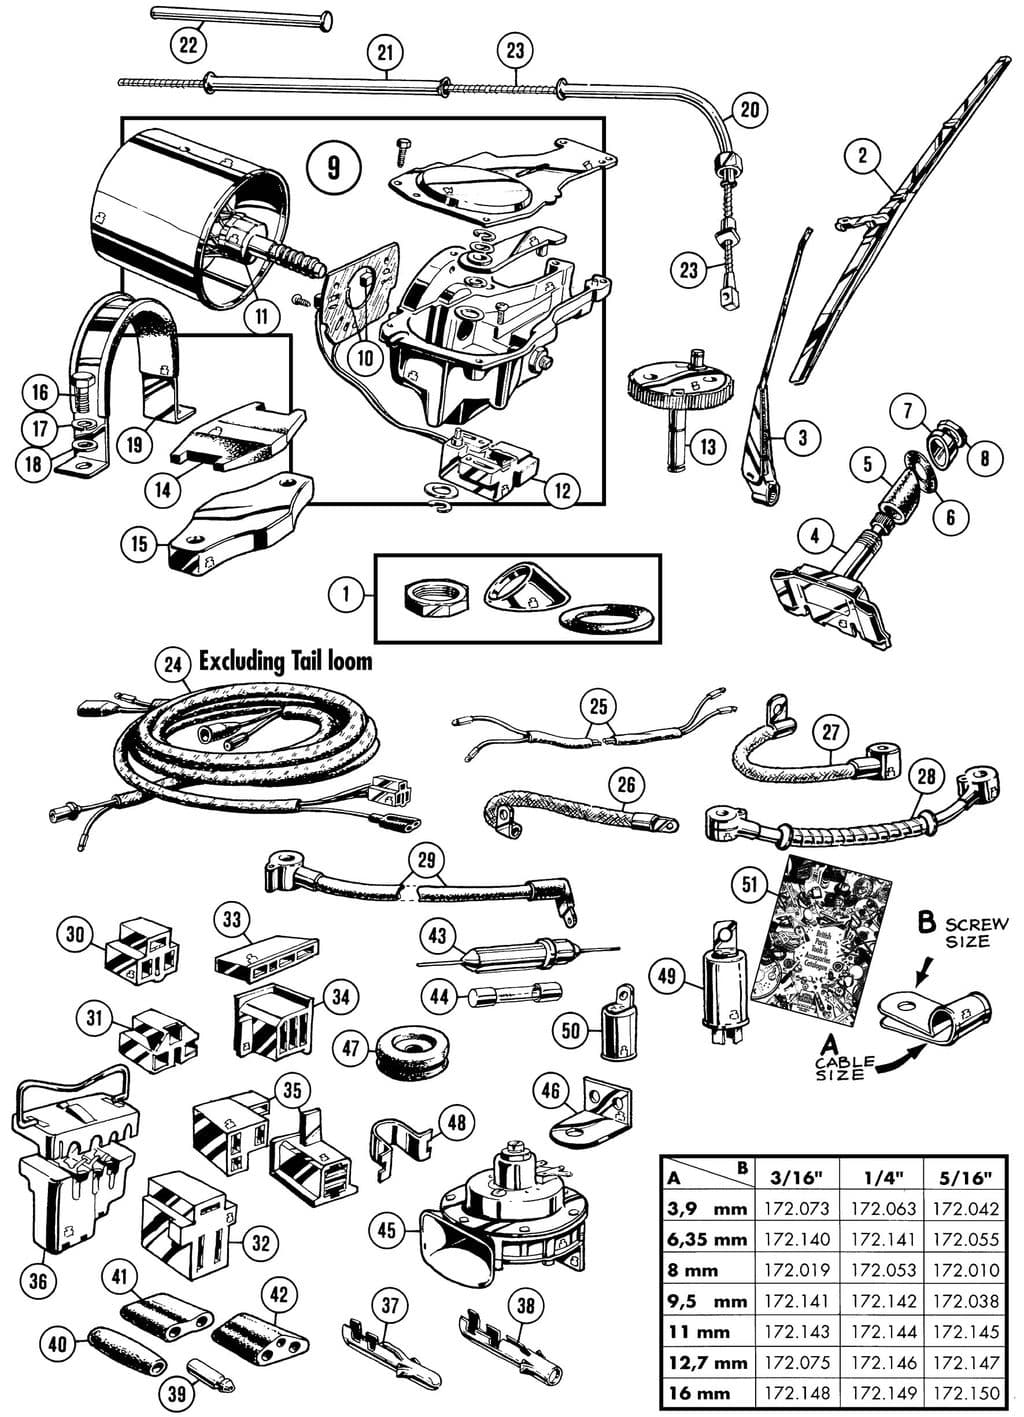 MGC 1967-1969 - Wires & electrical cabling - 1